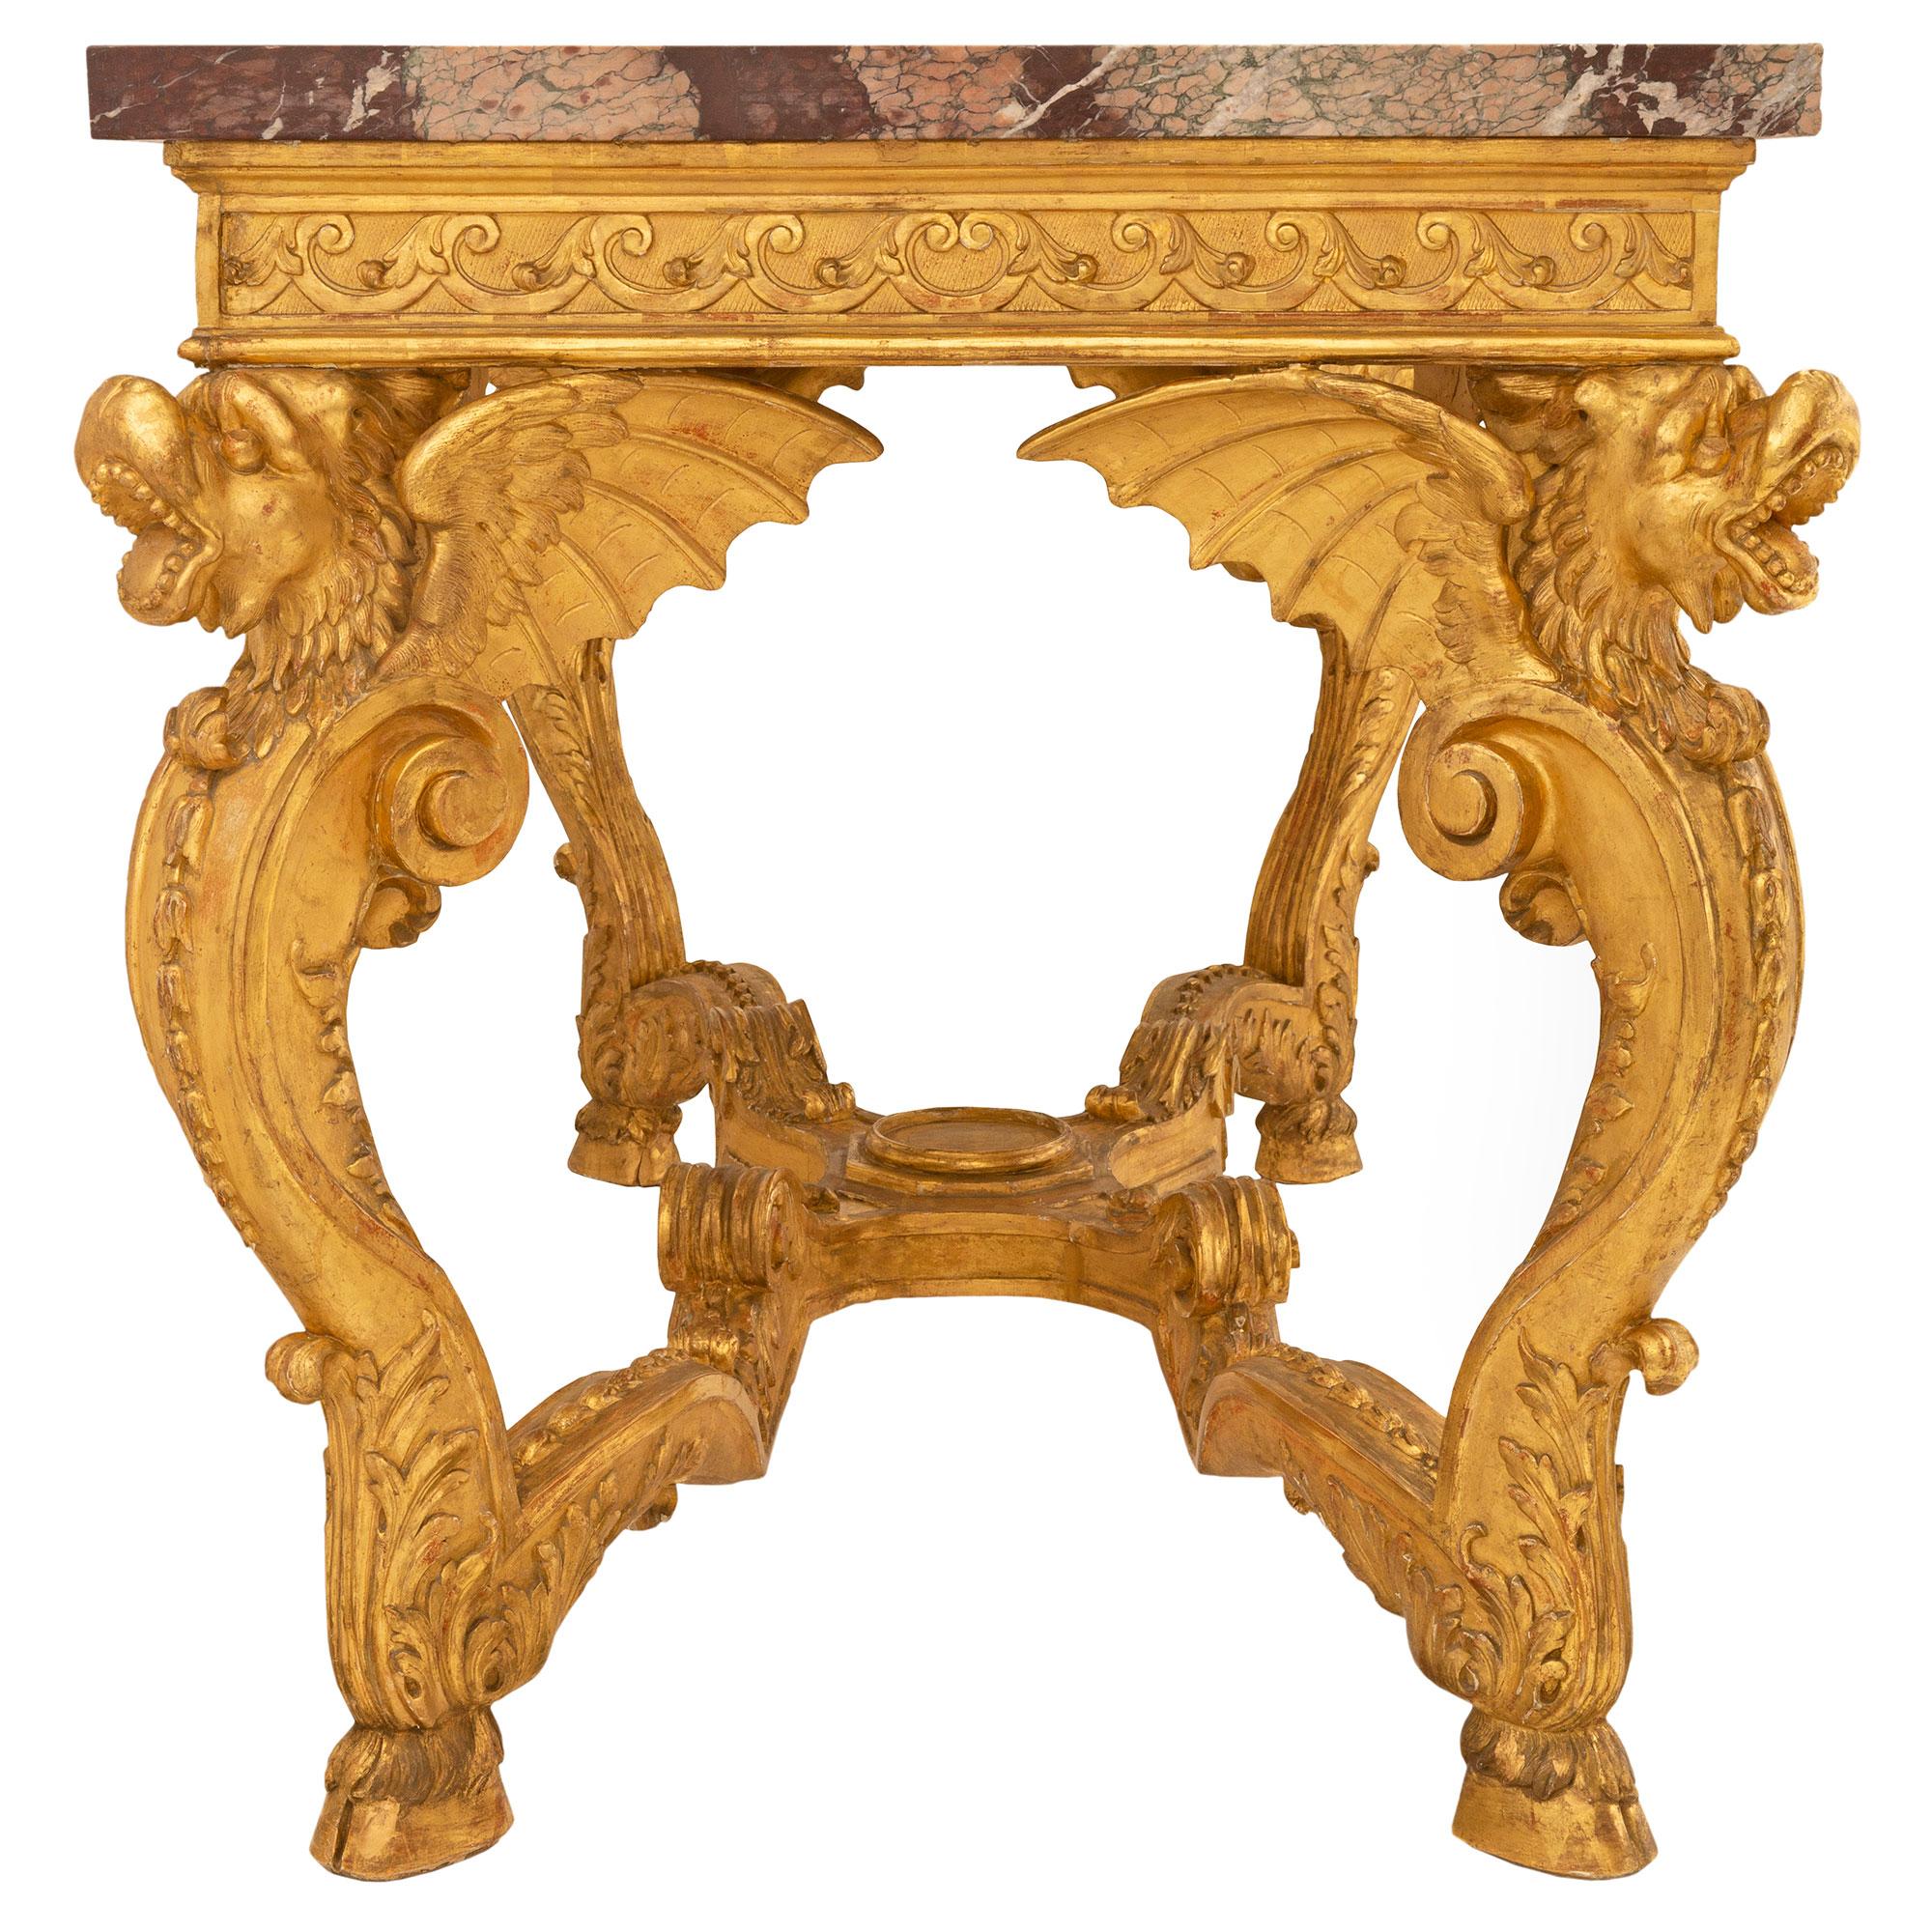 French Mid-19th Century Regence Style Giltwood and Marble Center Table For Sale 1